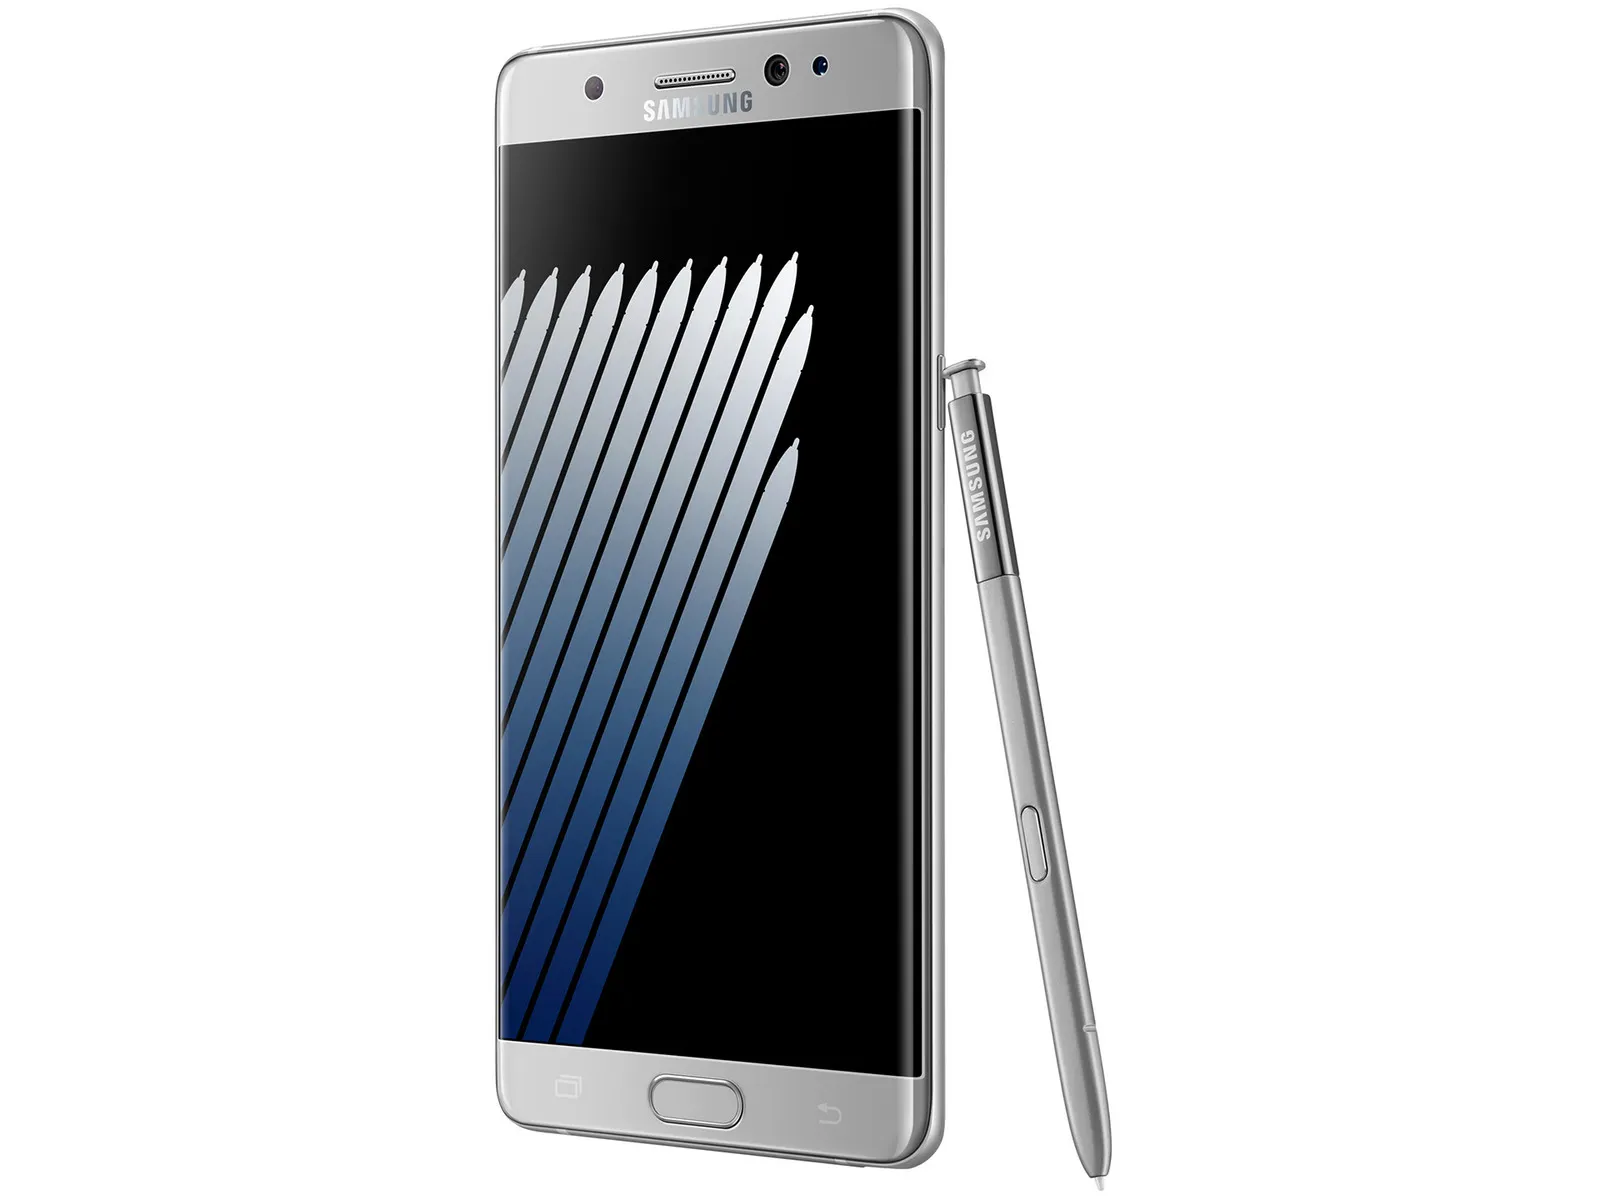 [Troubleshooting Guide] What to do if your Samsung Galaxy Note7 continues rebooting on its own after the rooting method